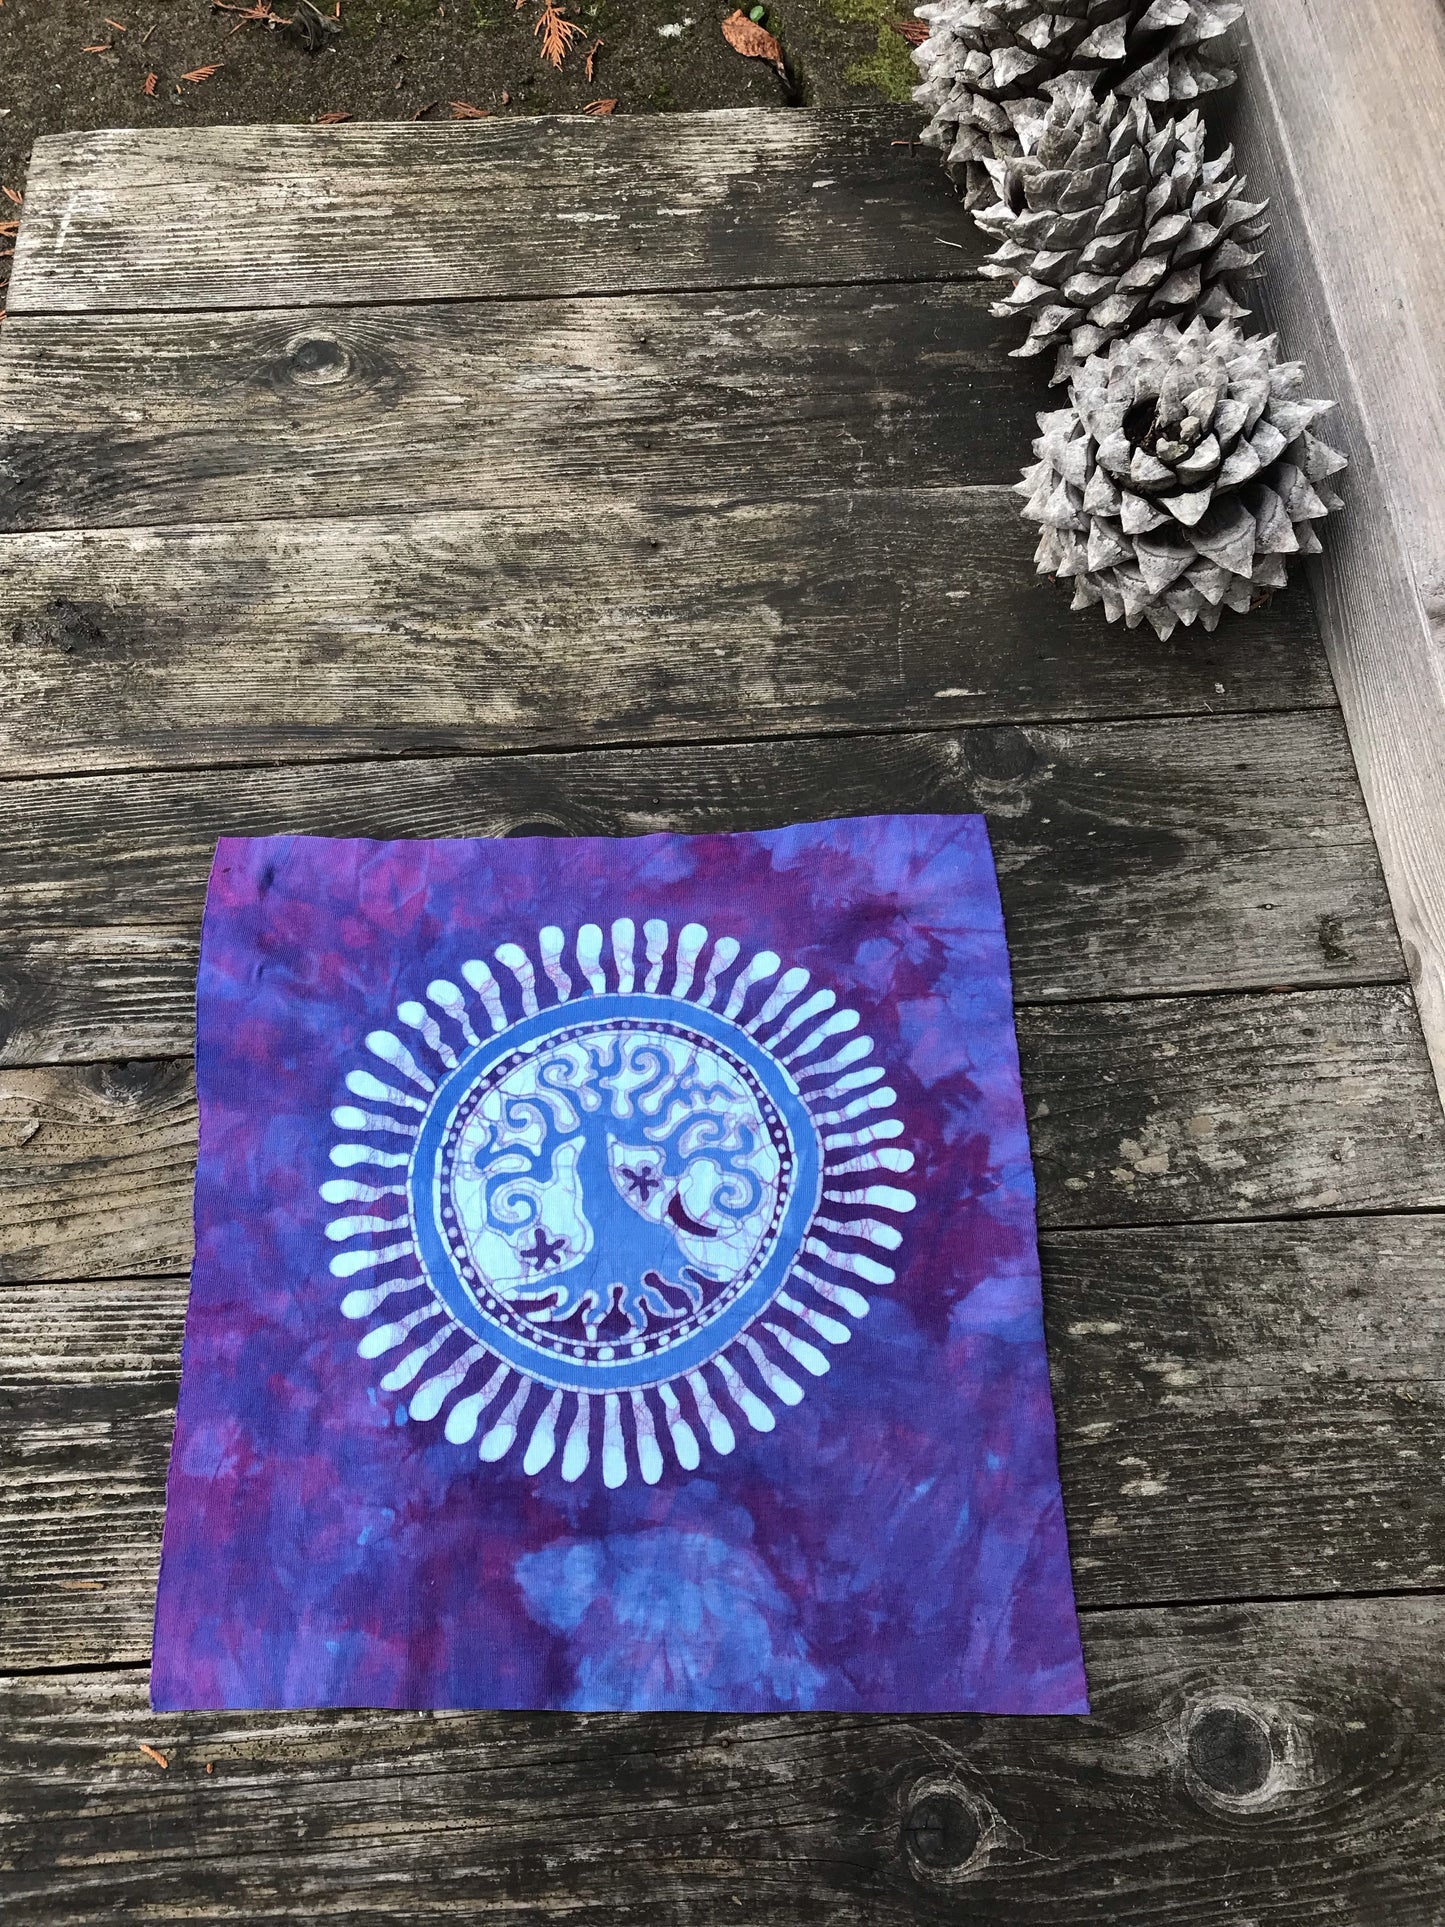 Hand Painted Batik Fabric Square - Tree of Life in Purple and Periwinkle Batikwalla by Victoria 